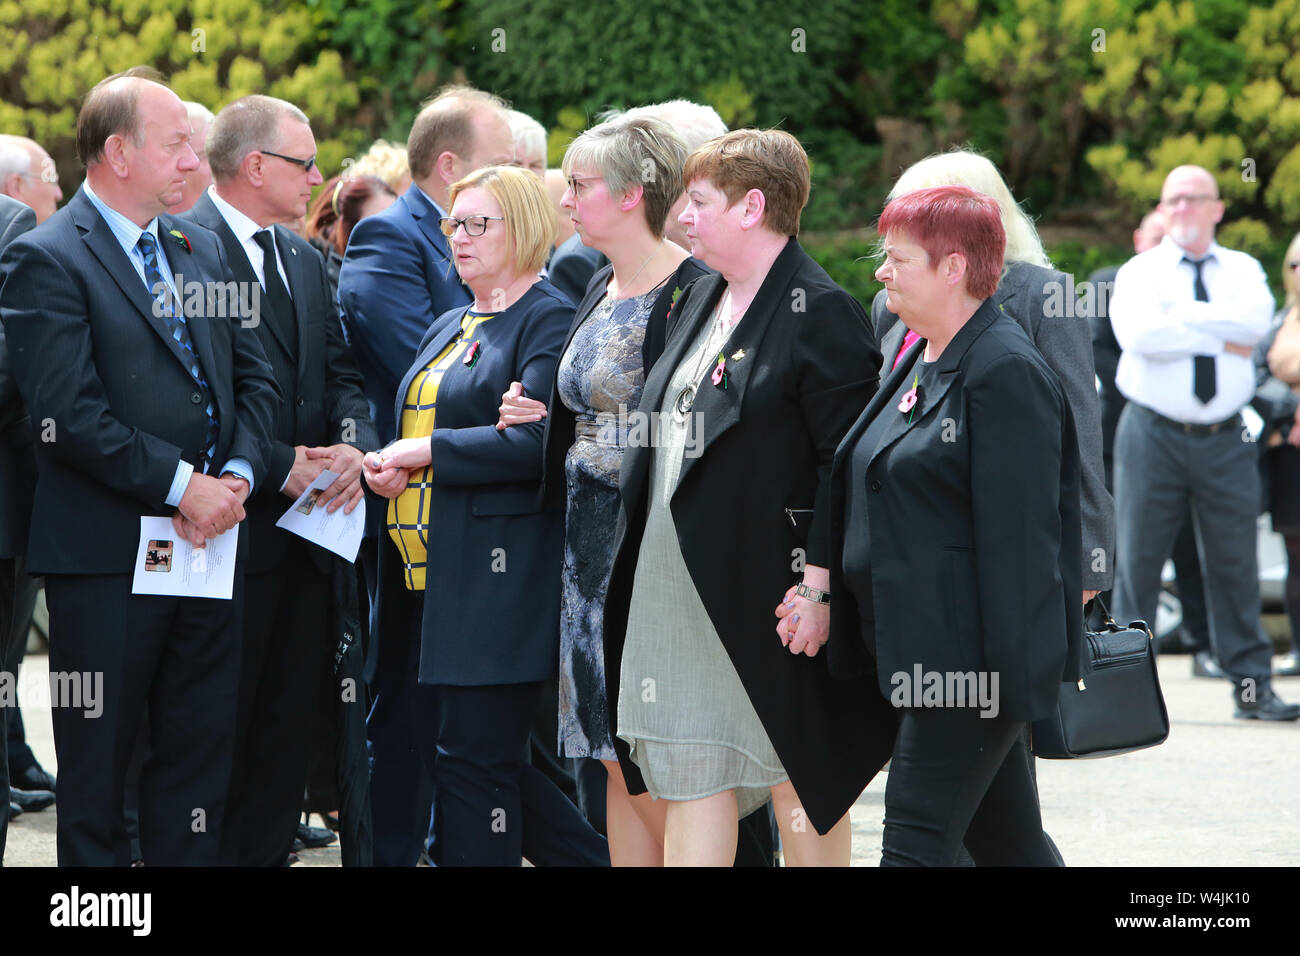 Relatives arrives for the Funeral of Willie Frazer at Five Mile Hill Full Gospel Fellowship Church on the Maytown Road, County Armagh, Monday July 1st, 2019. (Photo by Paul McErlane for the Belfast Telegraph) Stock Photo